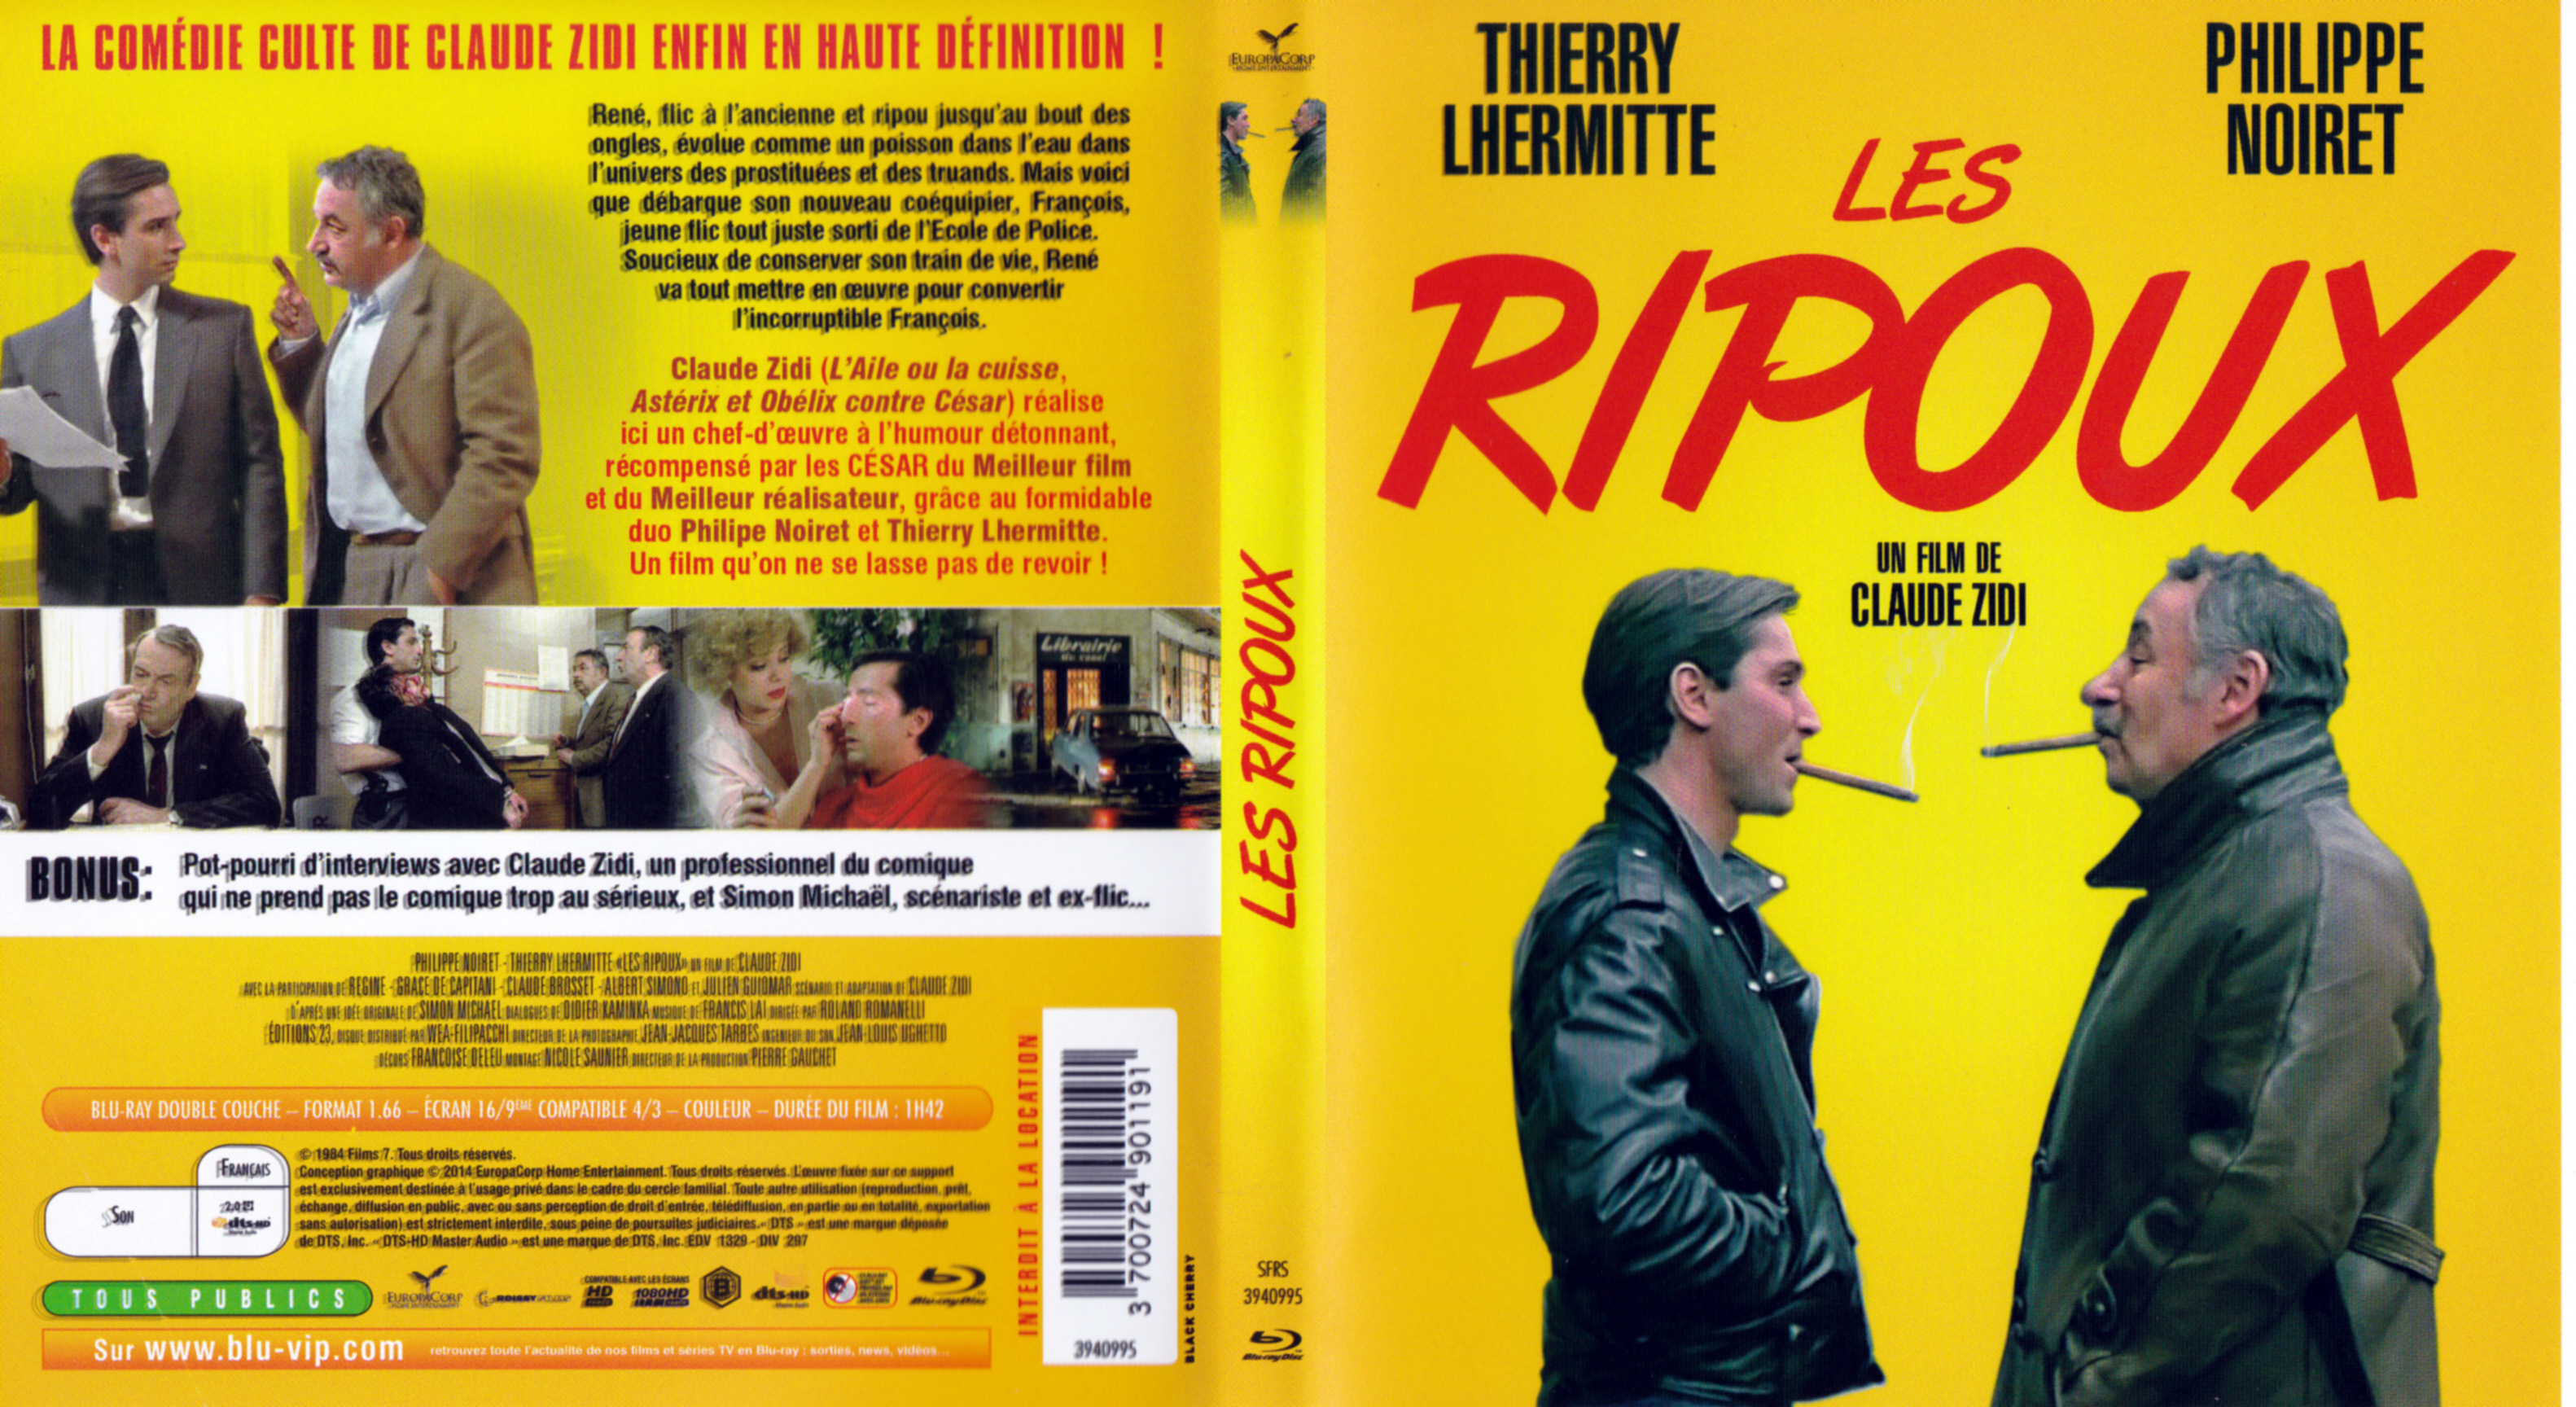 Jaquette DVD Les ripoux (BLU-RAY)